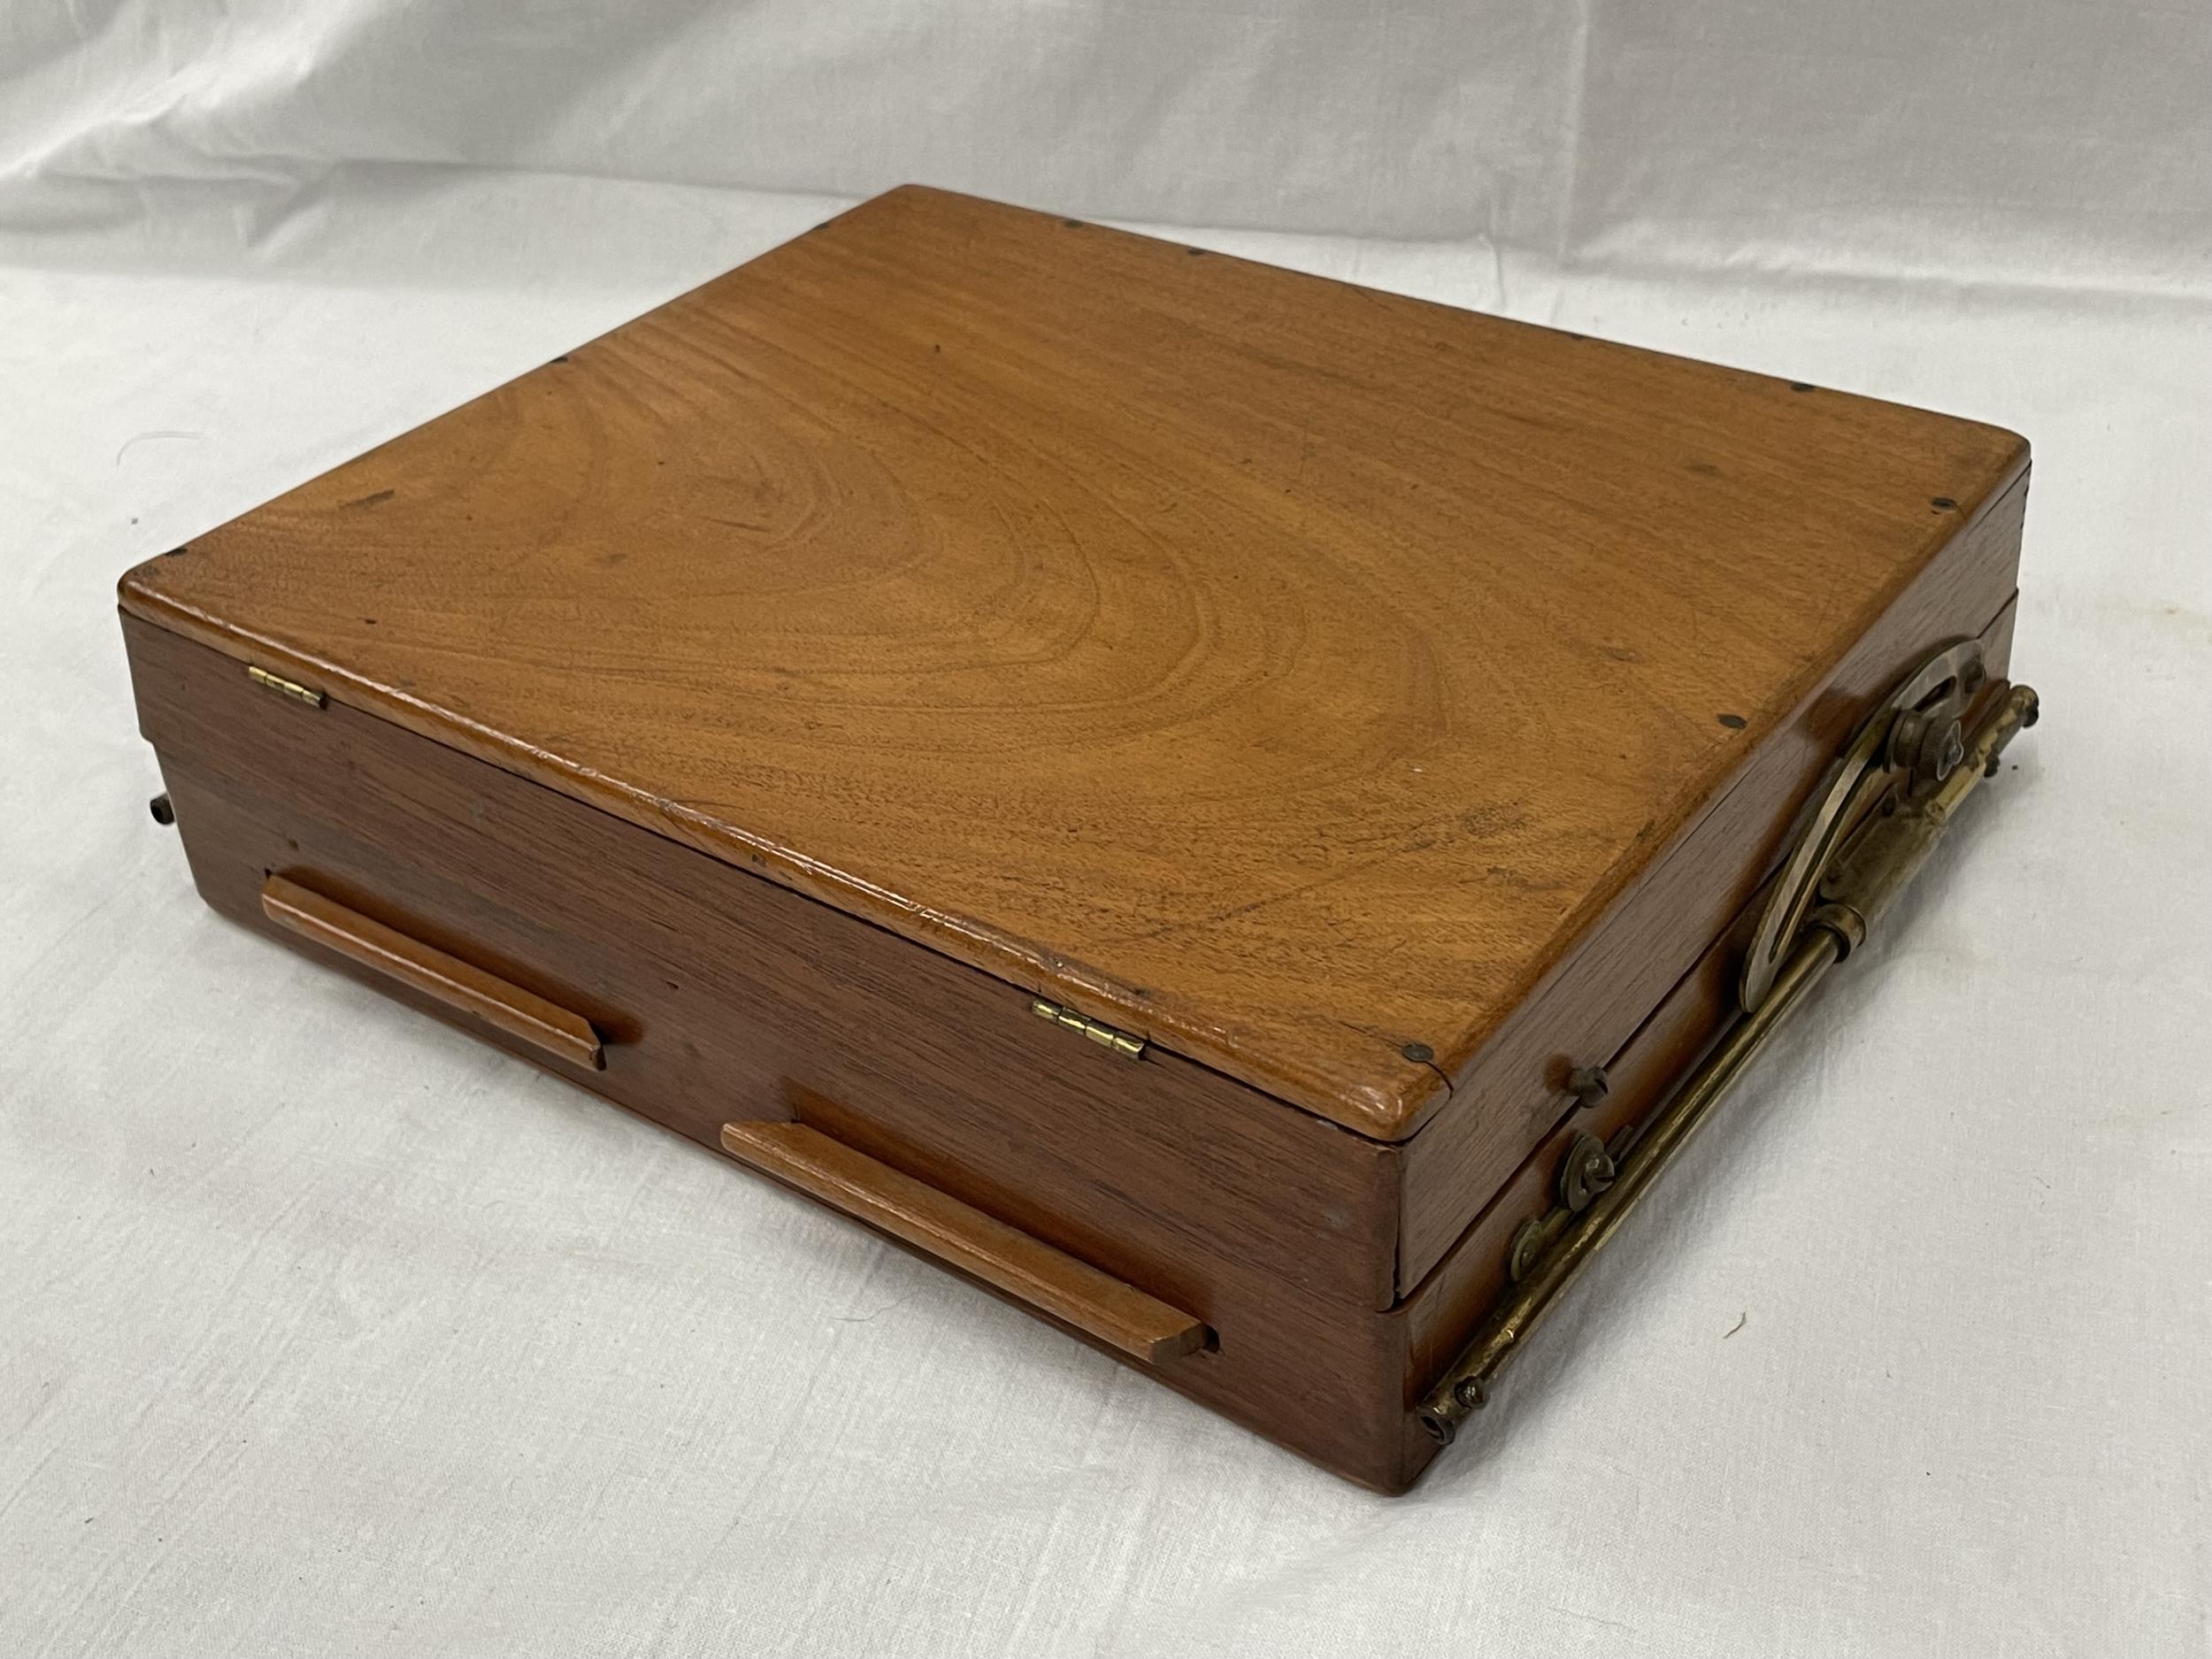 A 19TH CENTURY ARTIST'S FOLDING PAINTING BOX - Image 4 of 6